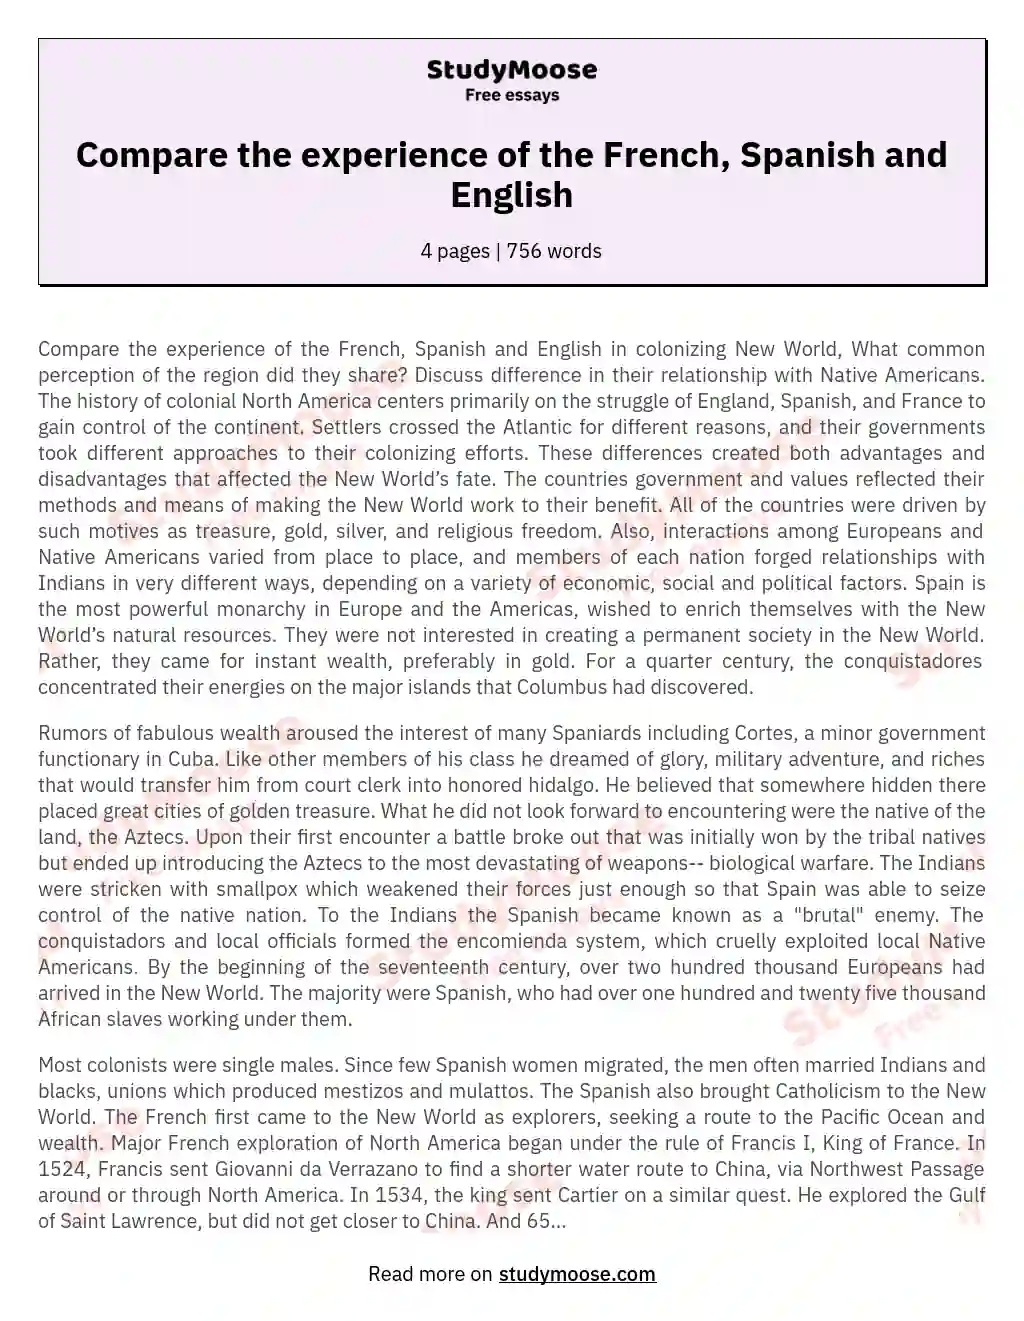 Compare the experience of the French, Spanish and English